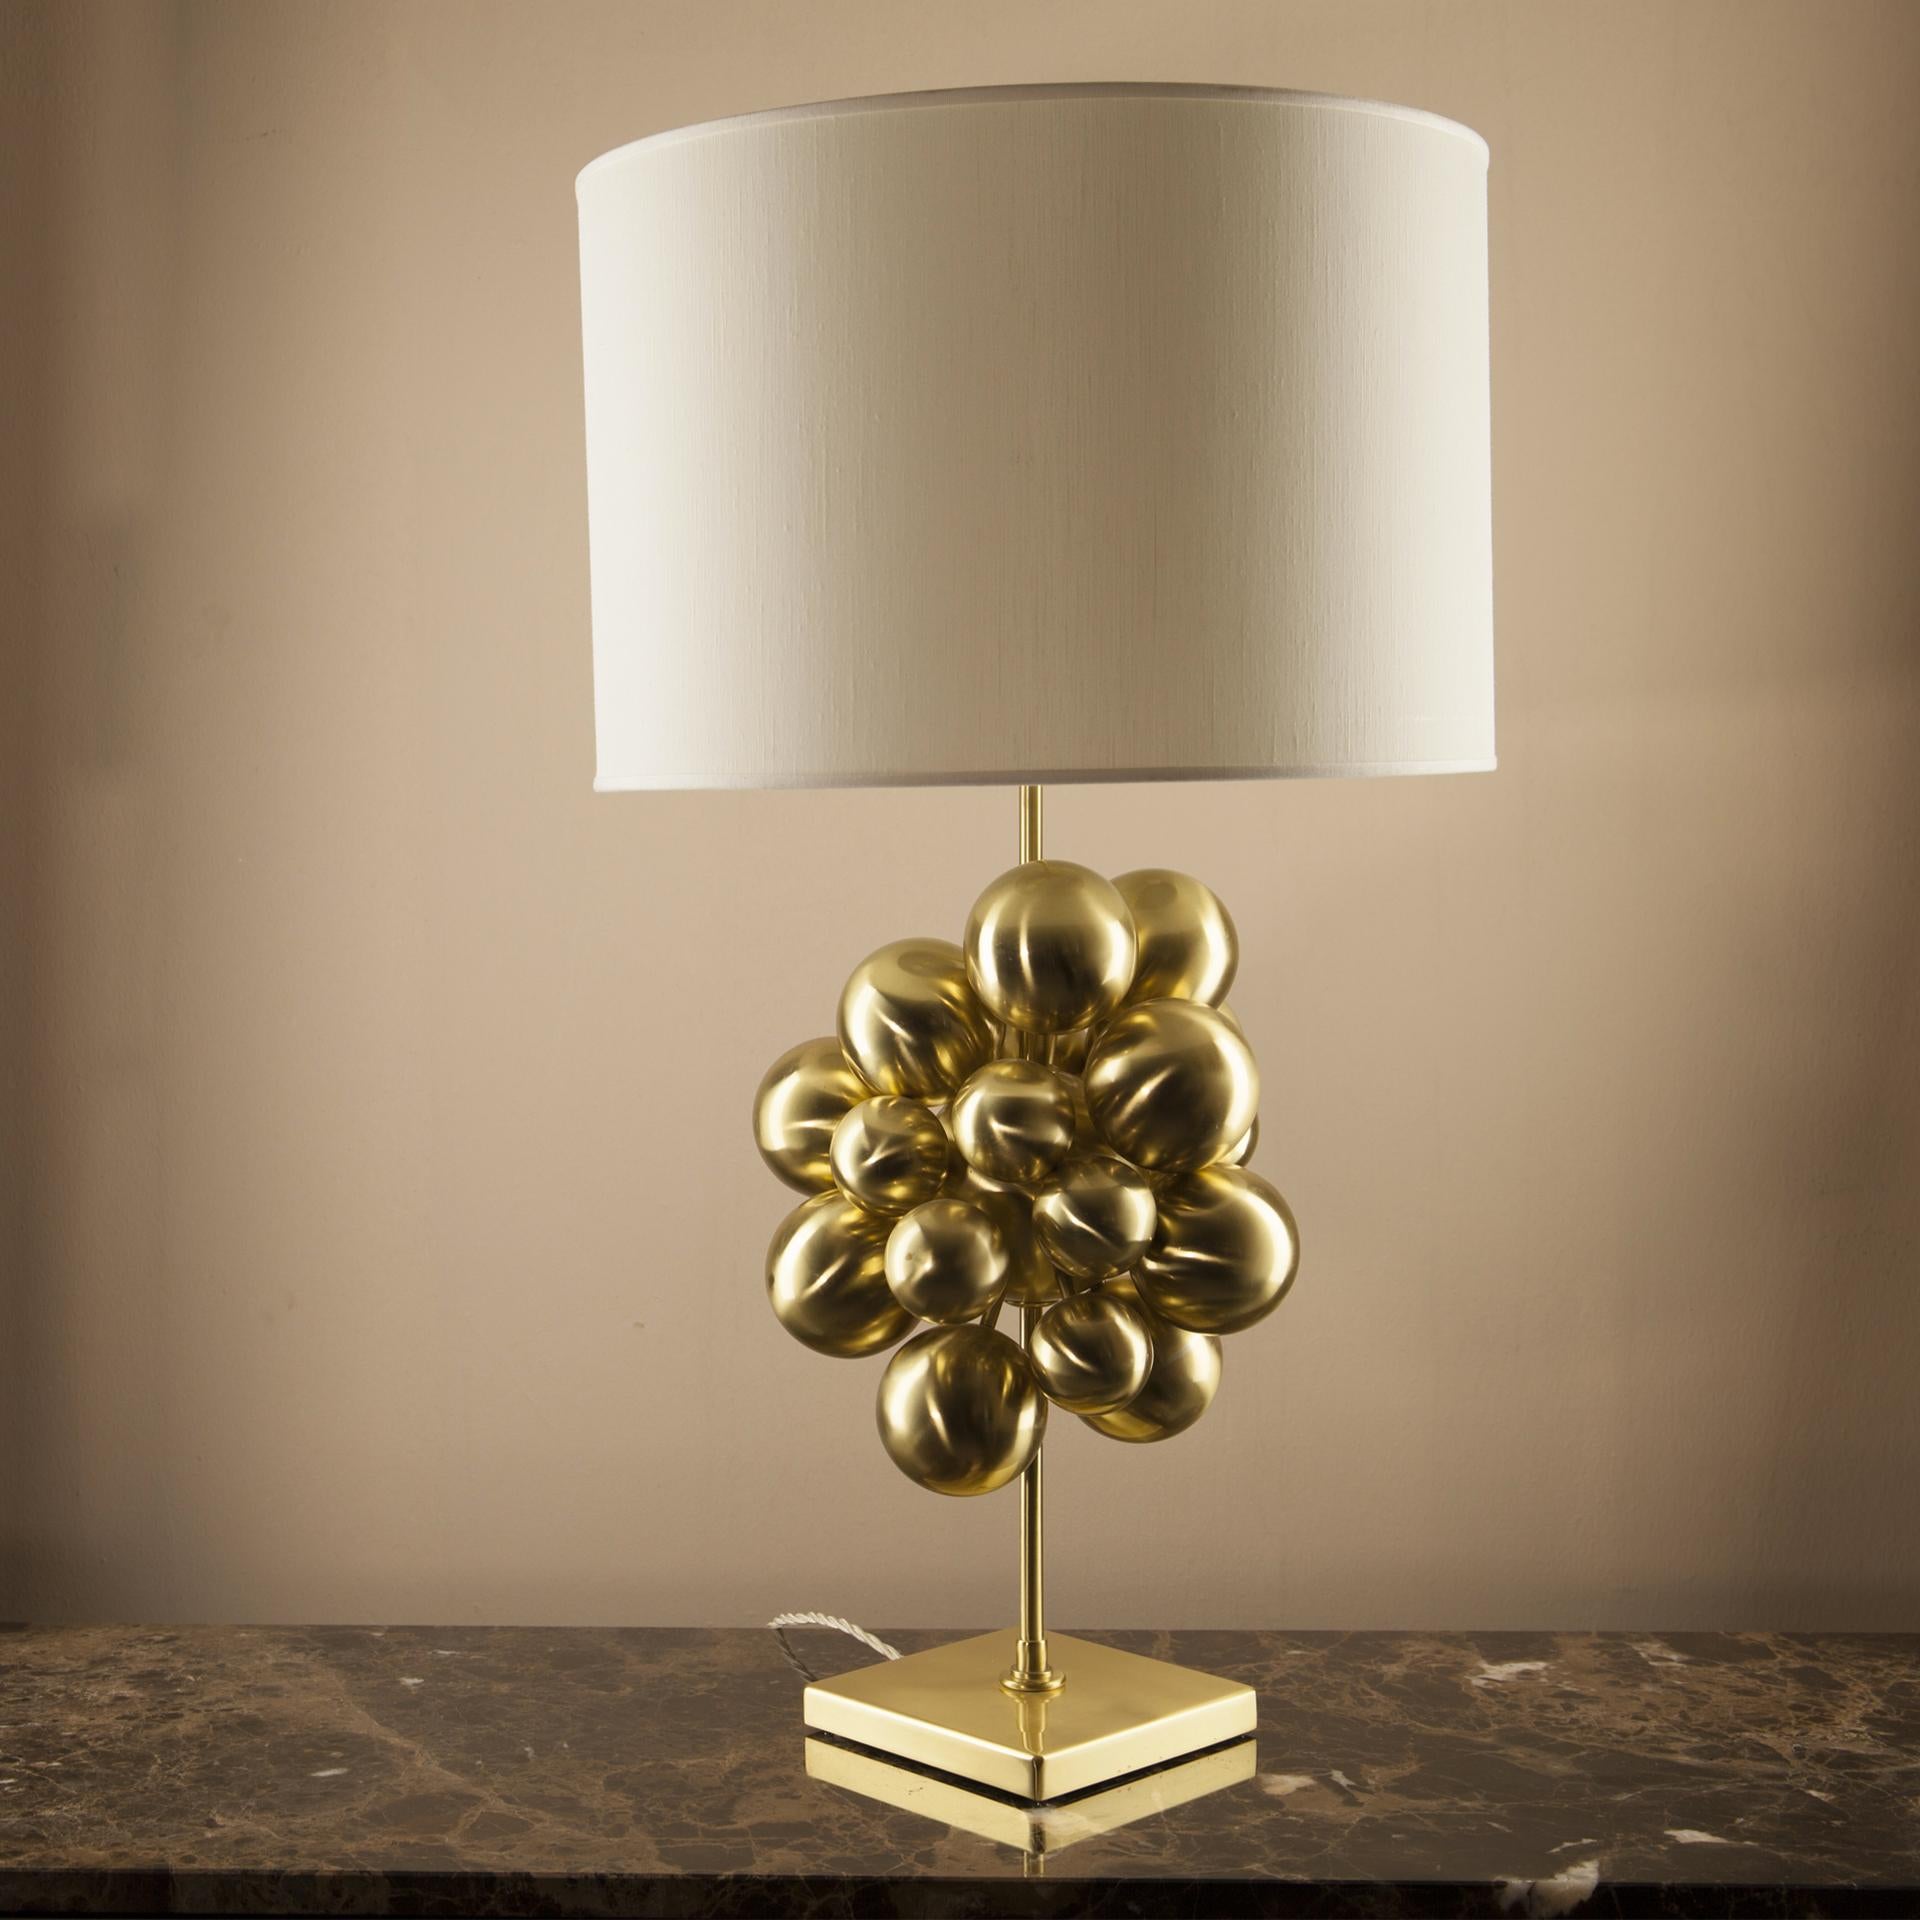 Plutone table lamp from Selezioni Domus, Florence
Imposing table lamp with twin sockets. All in solid brass to create a captivating sculptiral lamp body and a great play with the light.

Selezioni Domus Firenze Reference: FL-0414

Measurements